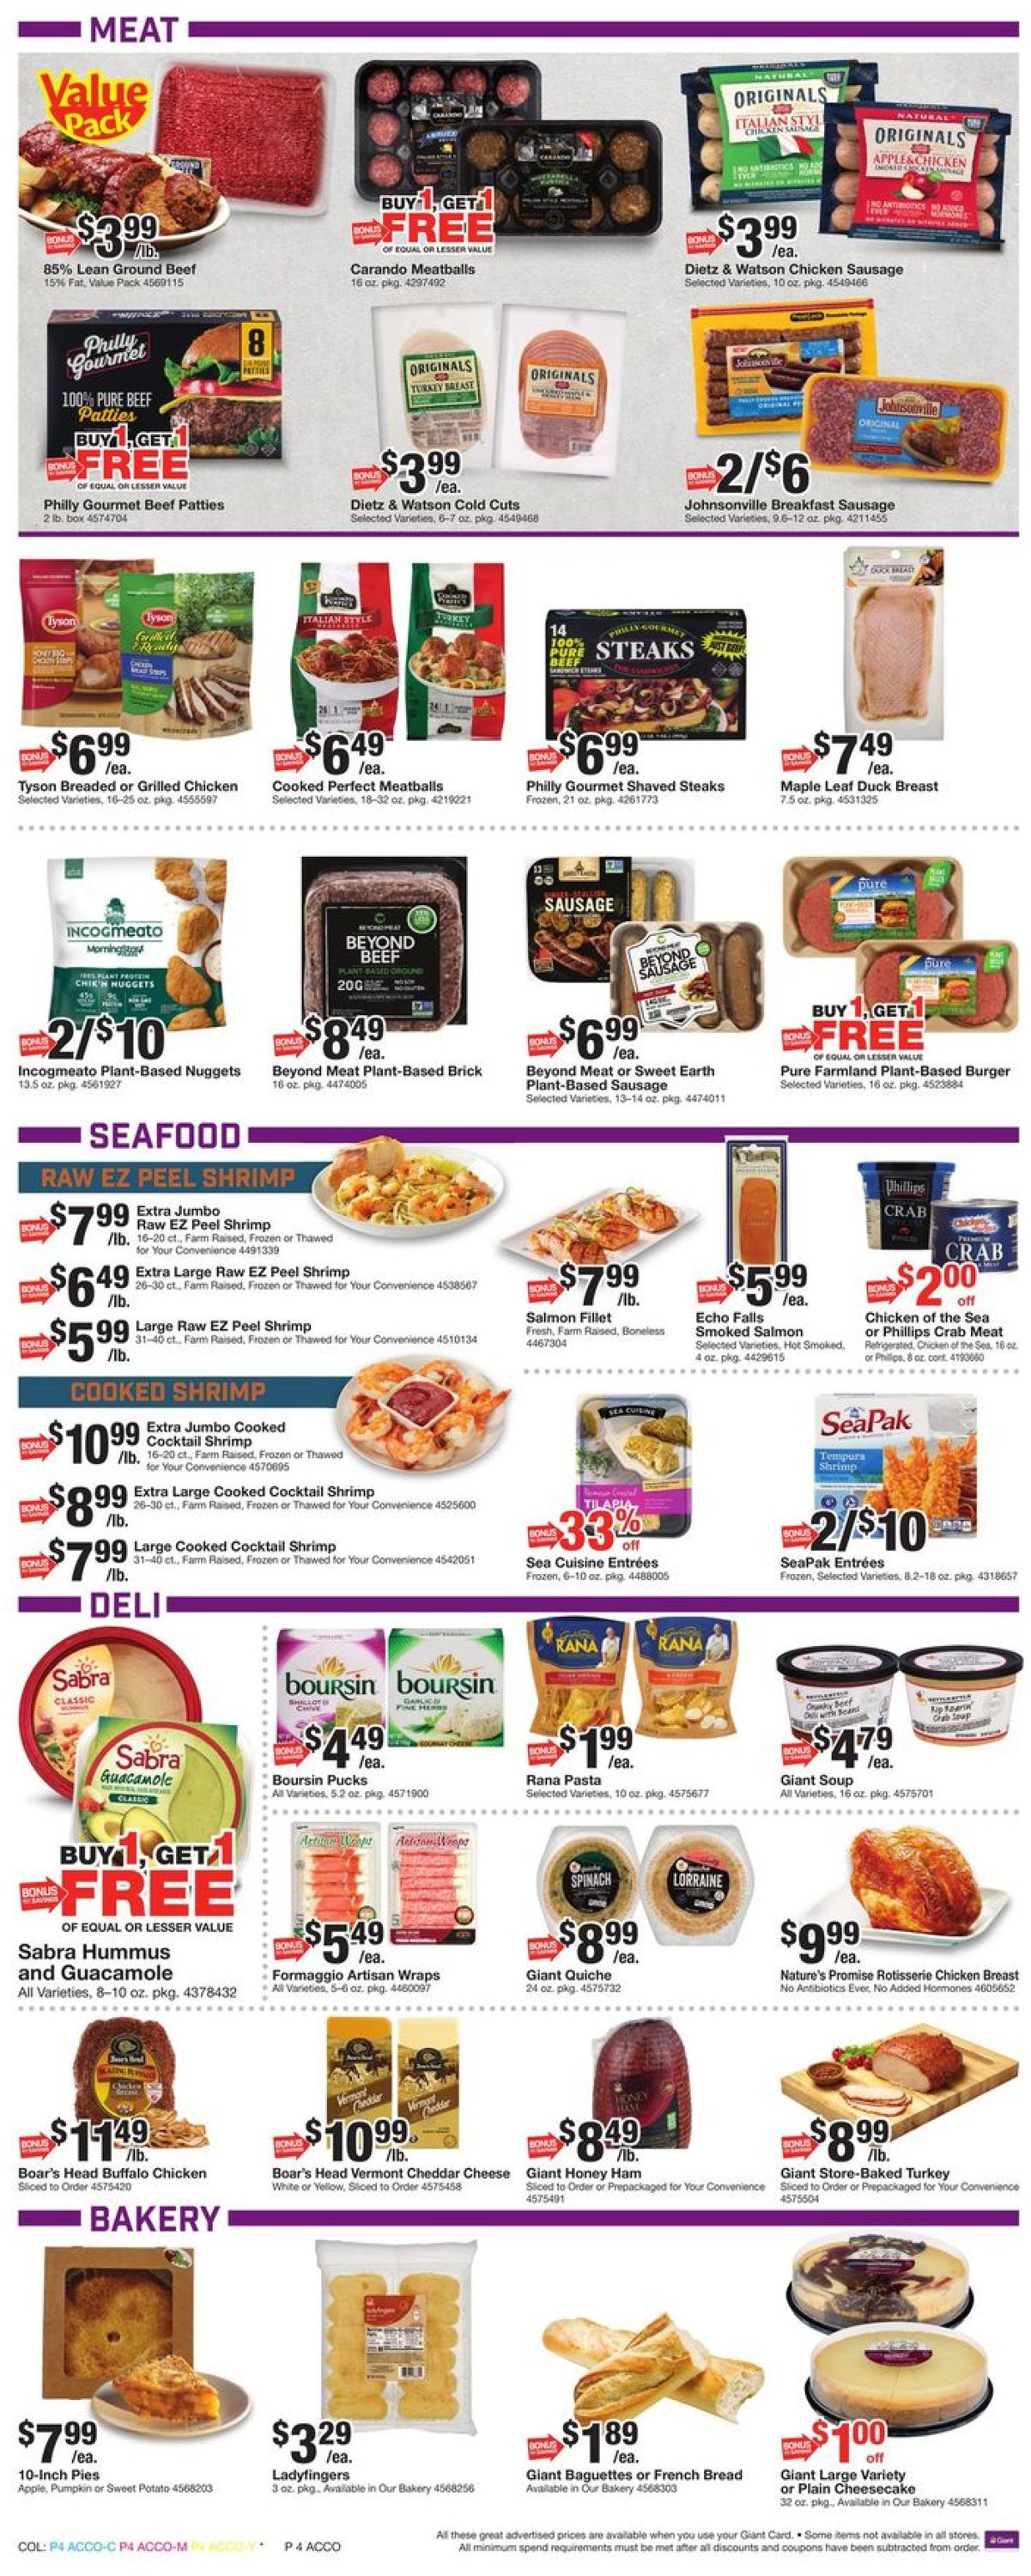 Giant Food Thanksgiving 2020 Weekly Ad Circular - valid 11/20-11/26/2020 (Page 8)